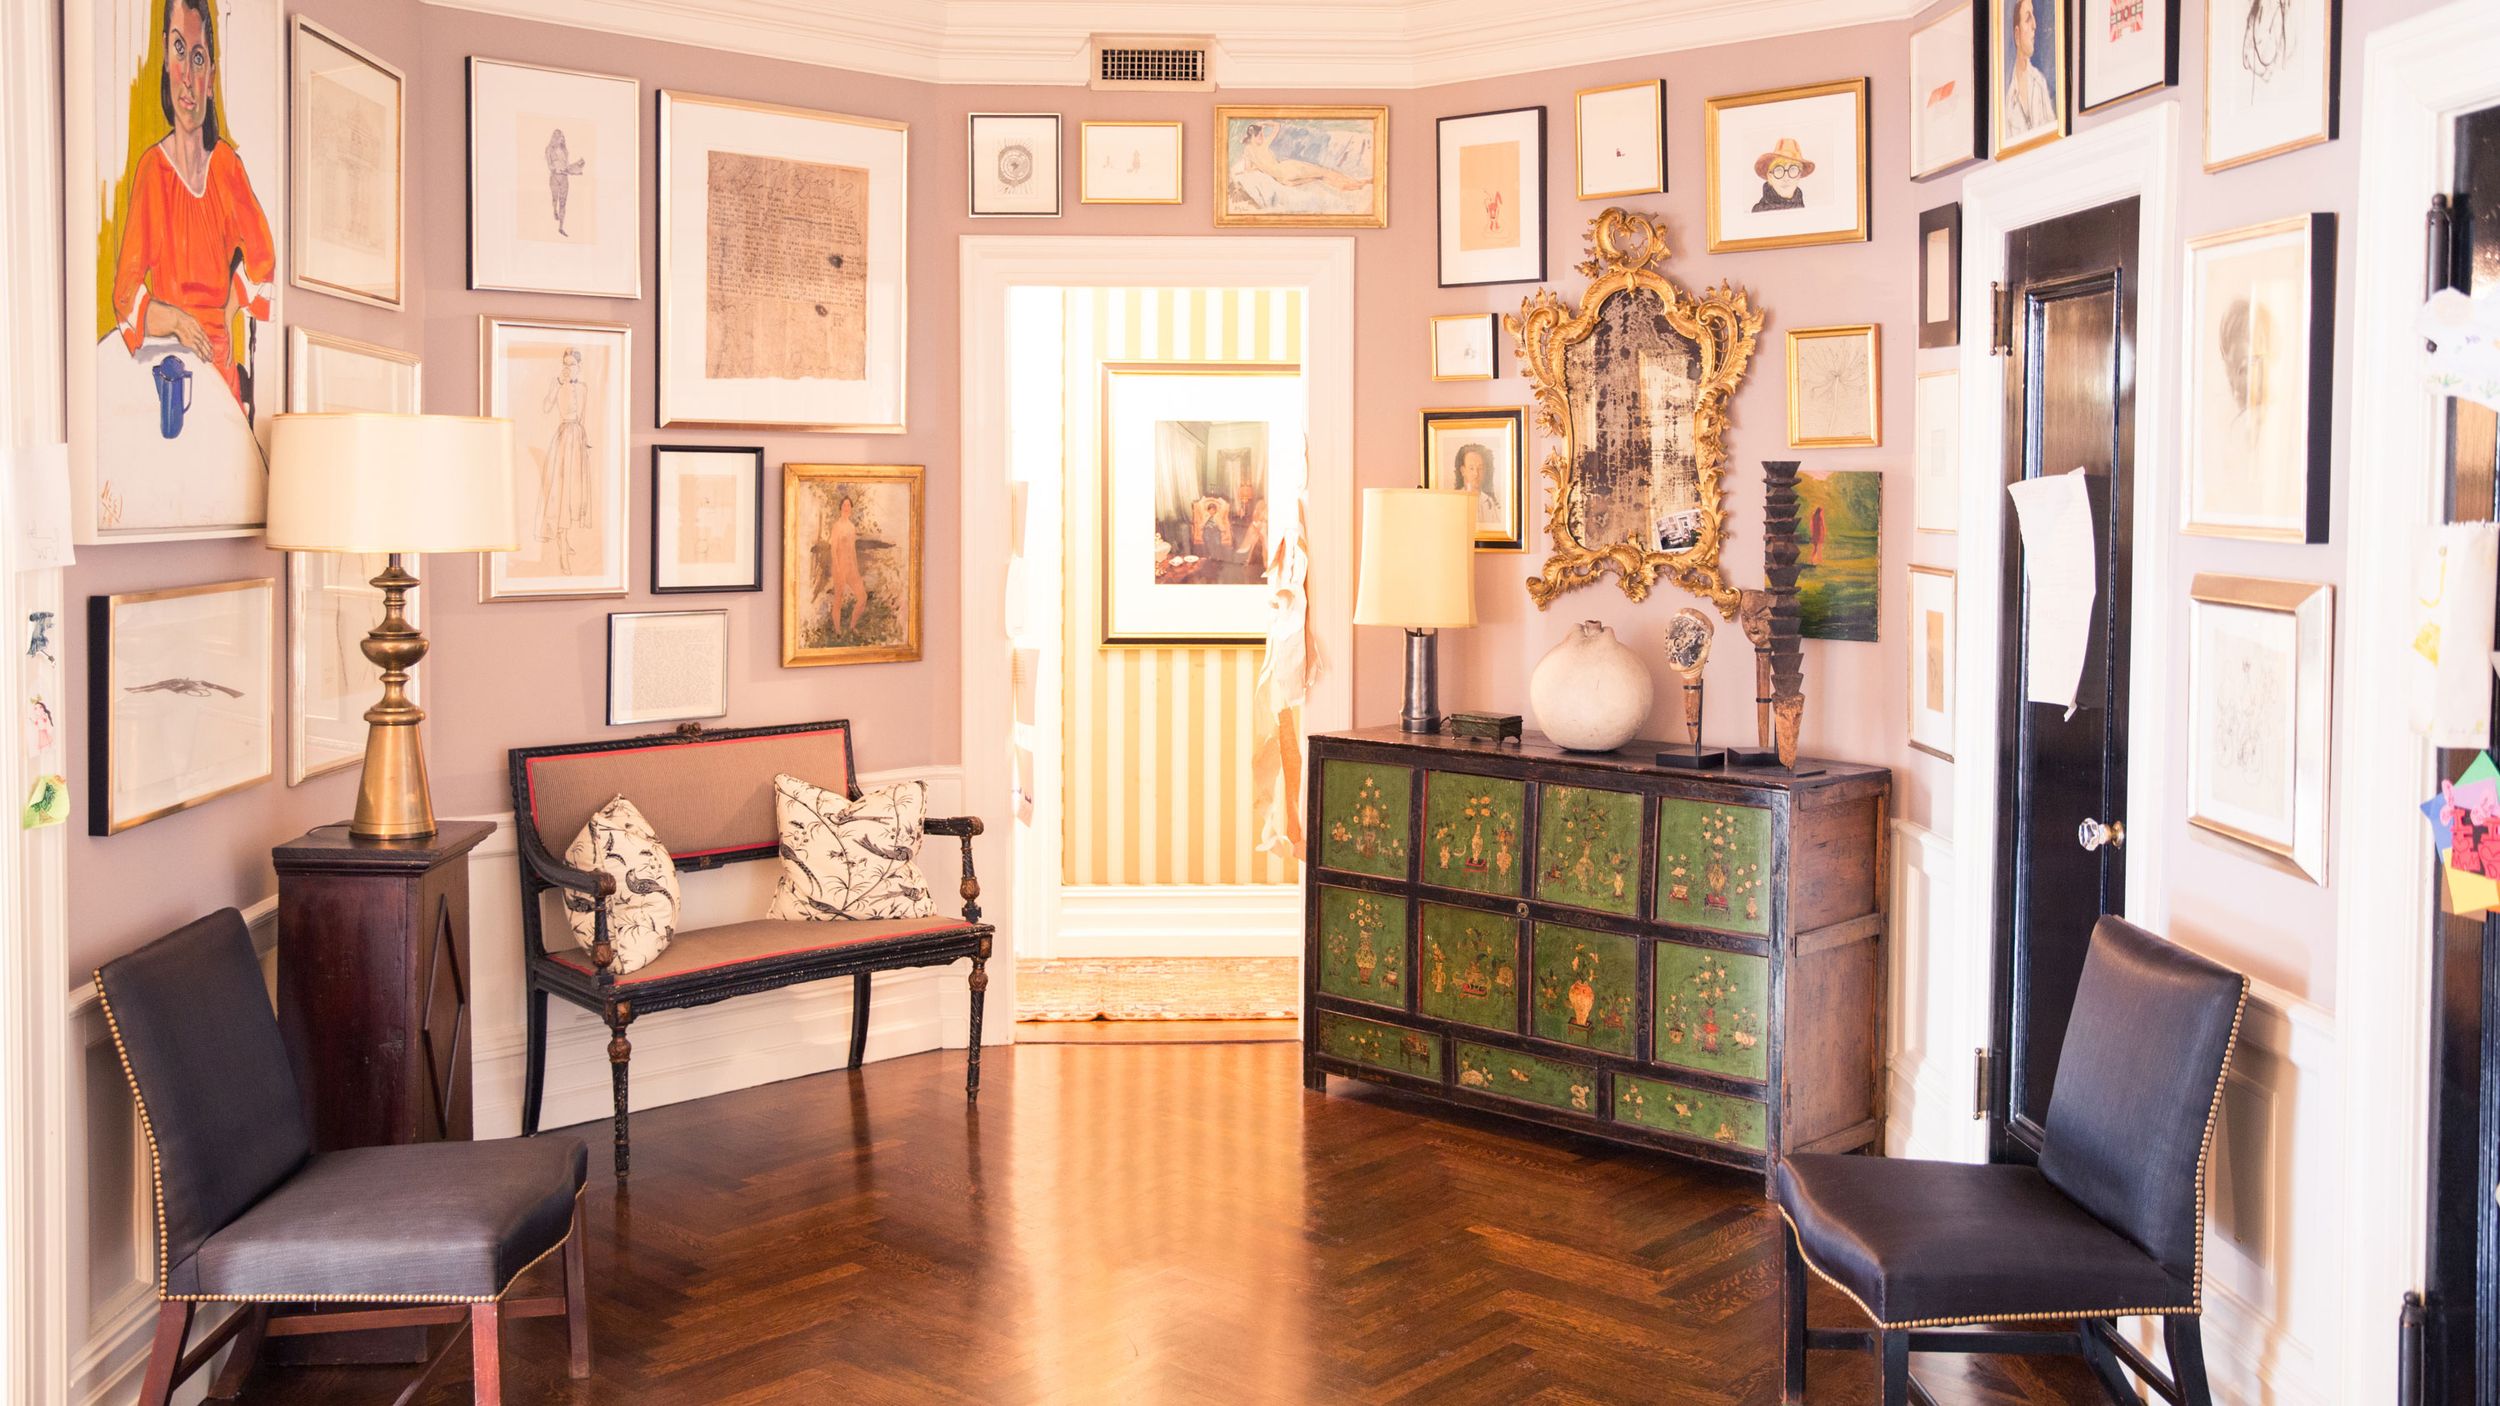 At Home with Andy & Kate Spade (& Their Art Collection)